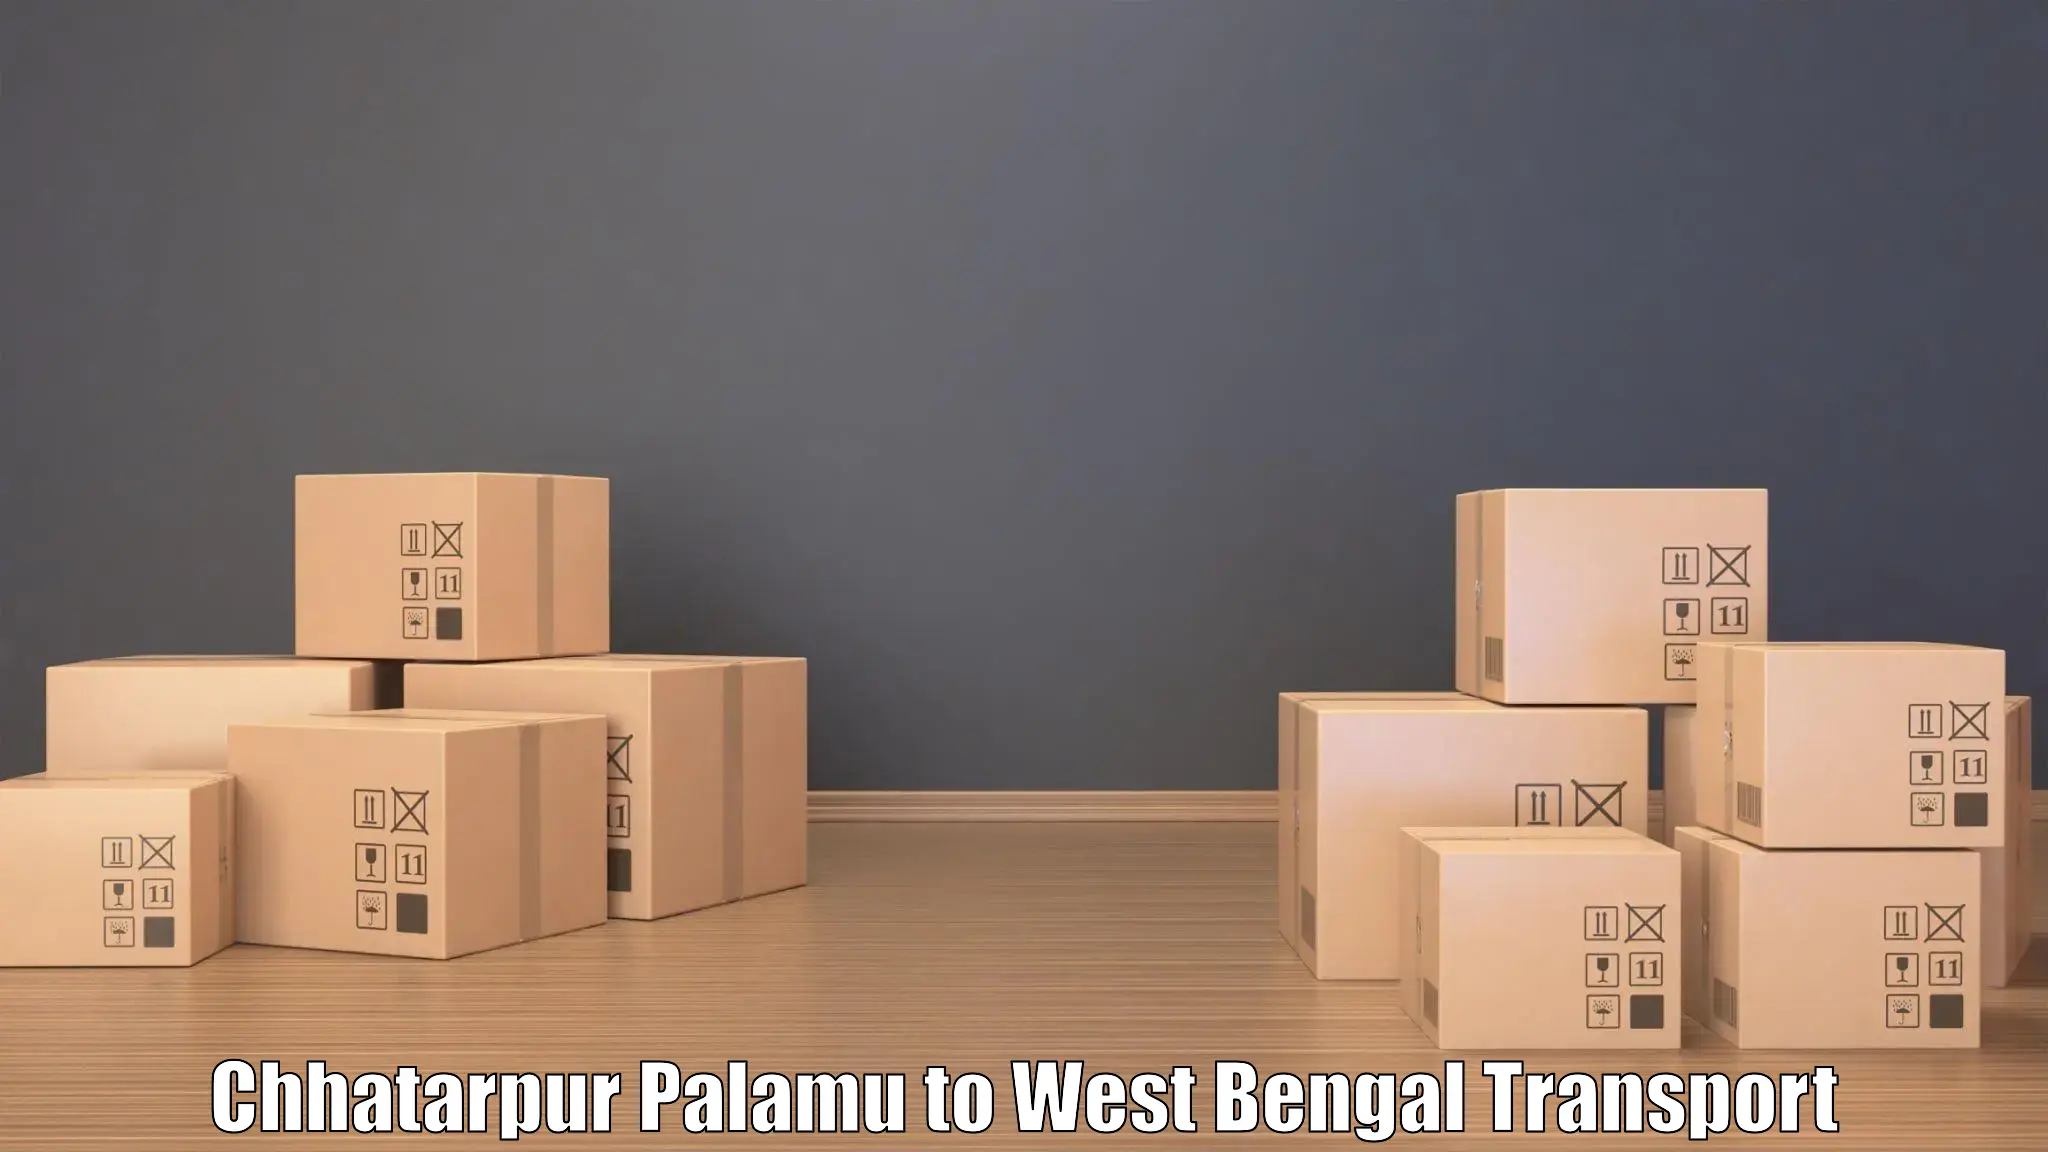 Package delivery services Chhatarpur Palamu to Haldia